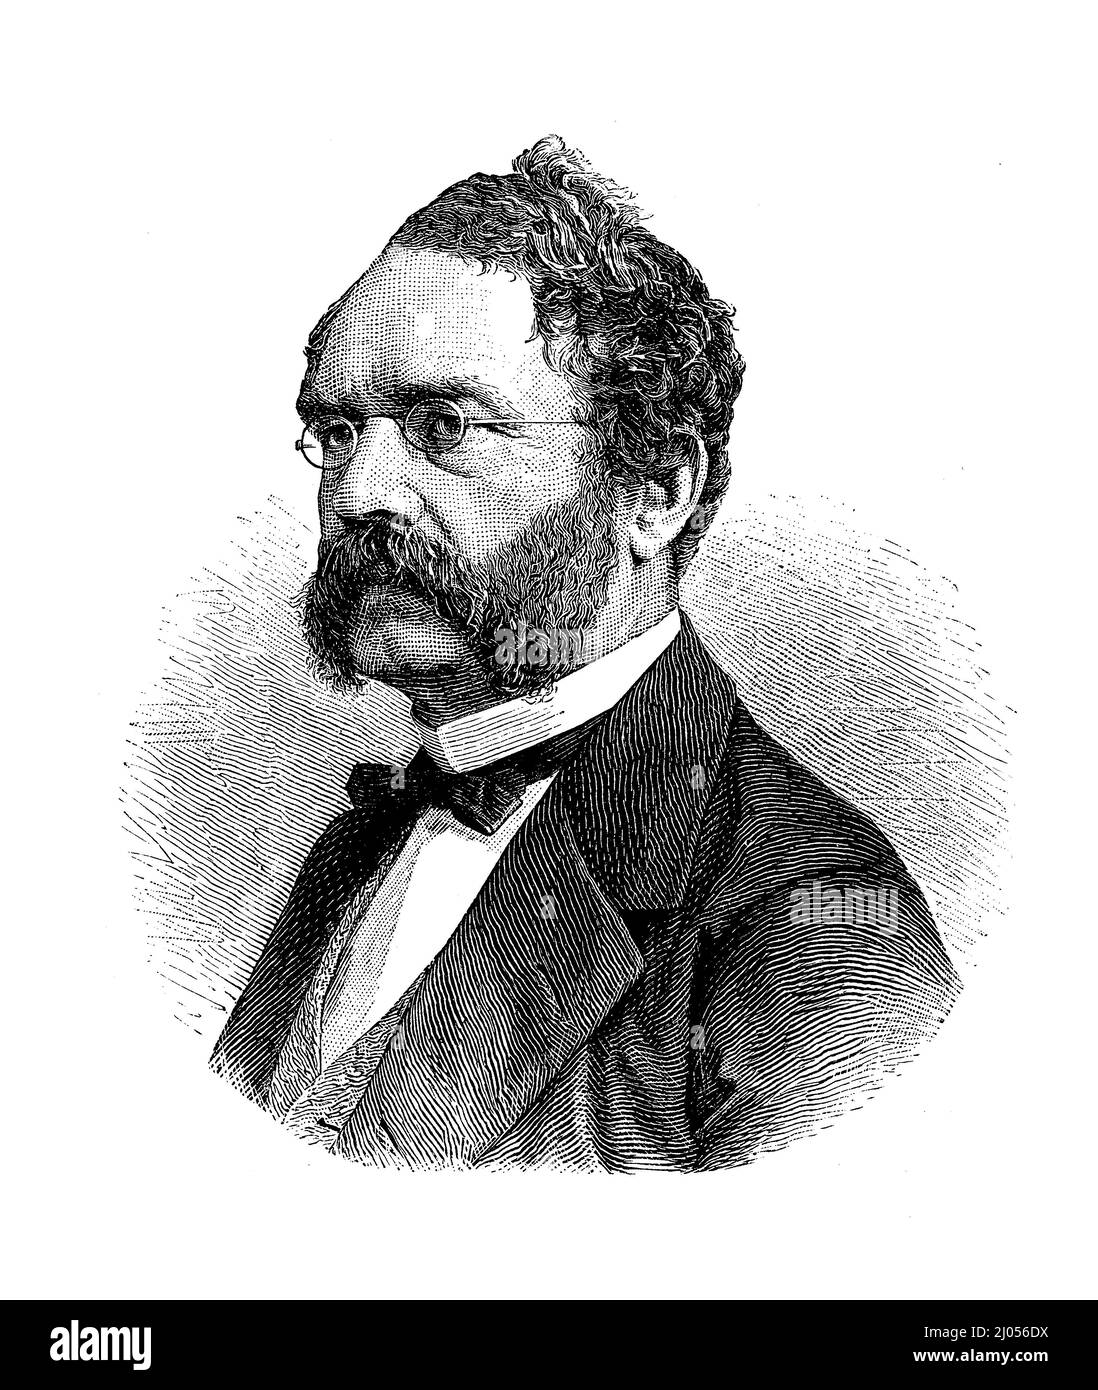 Portrait of Ernst Werner Siemens (1816-1892) German electrical engineer, inventor and industrialist founder of Siemens electrical and telecommunications conglomerate. Stock Photo